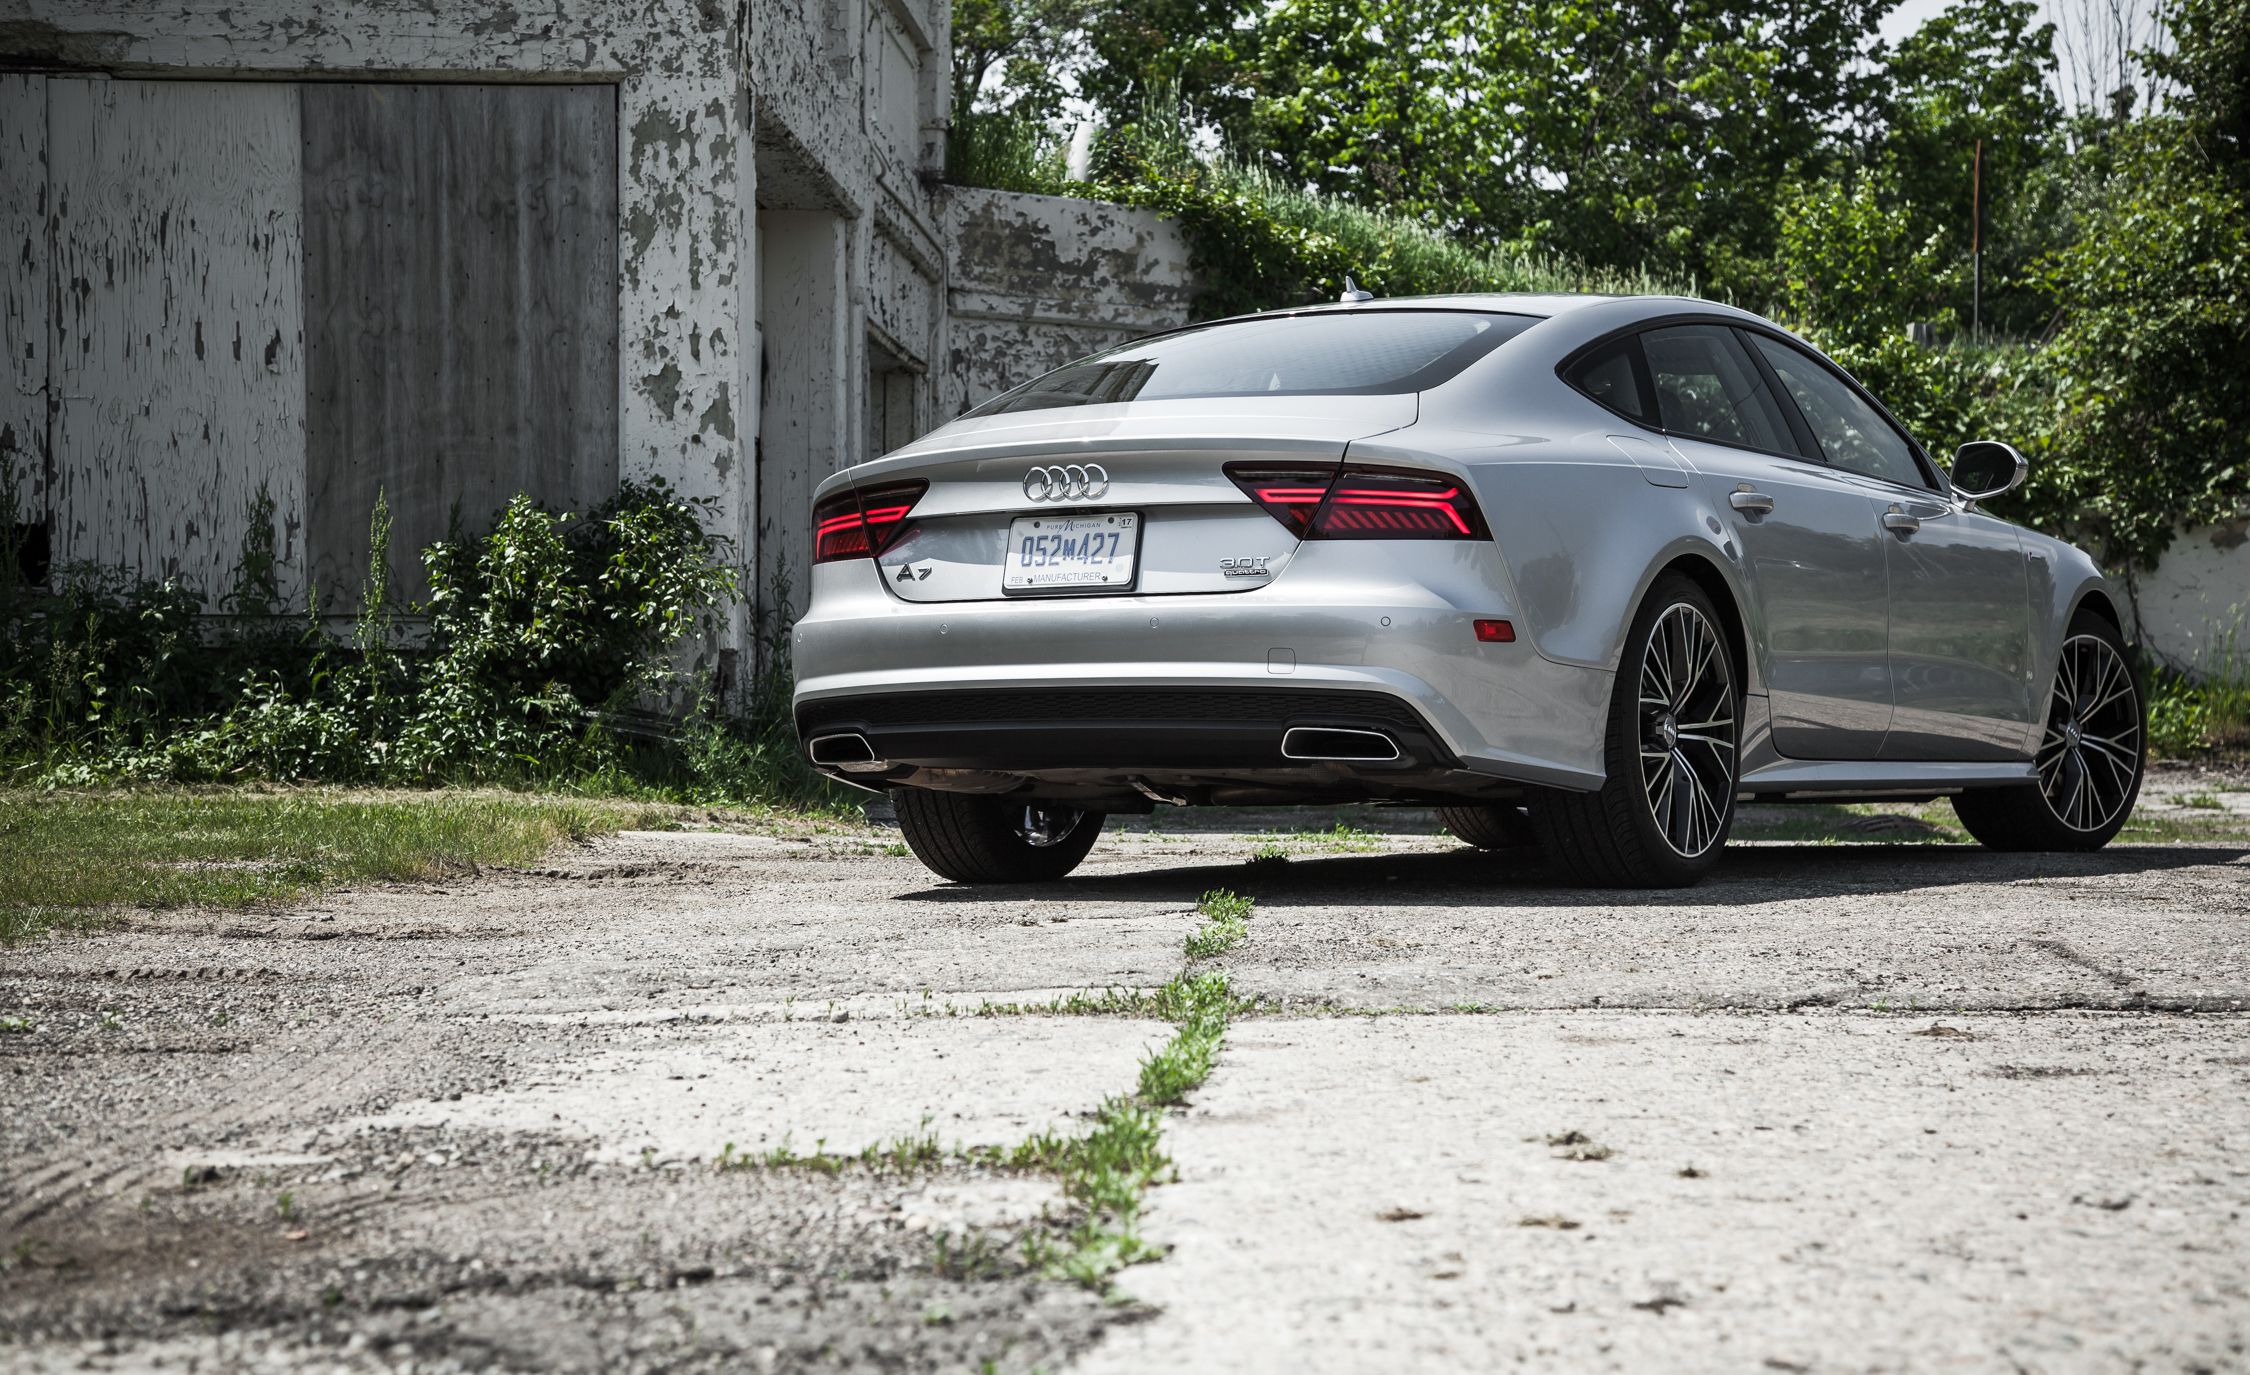 2016 Audi A7 Exterior Side And Rear (View 20 of 26)